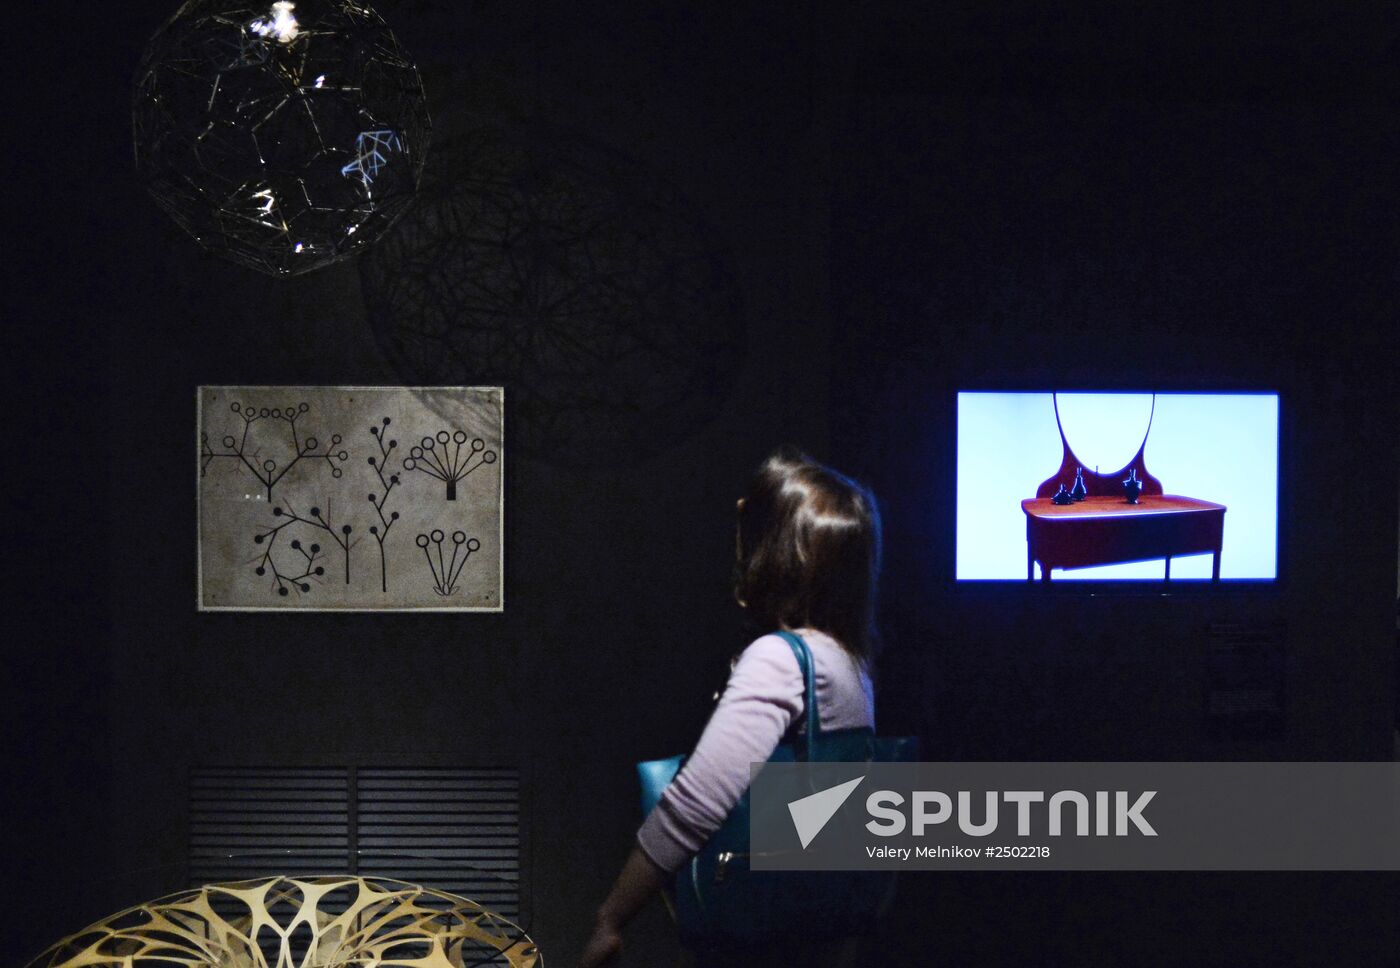 Exhibition "British Design: from William Morris to Digital Revolution" in Moscow